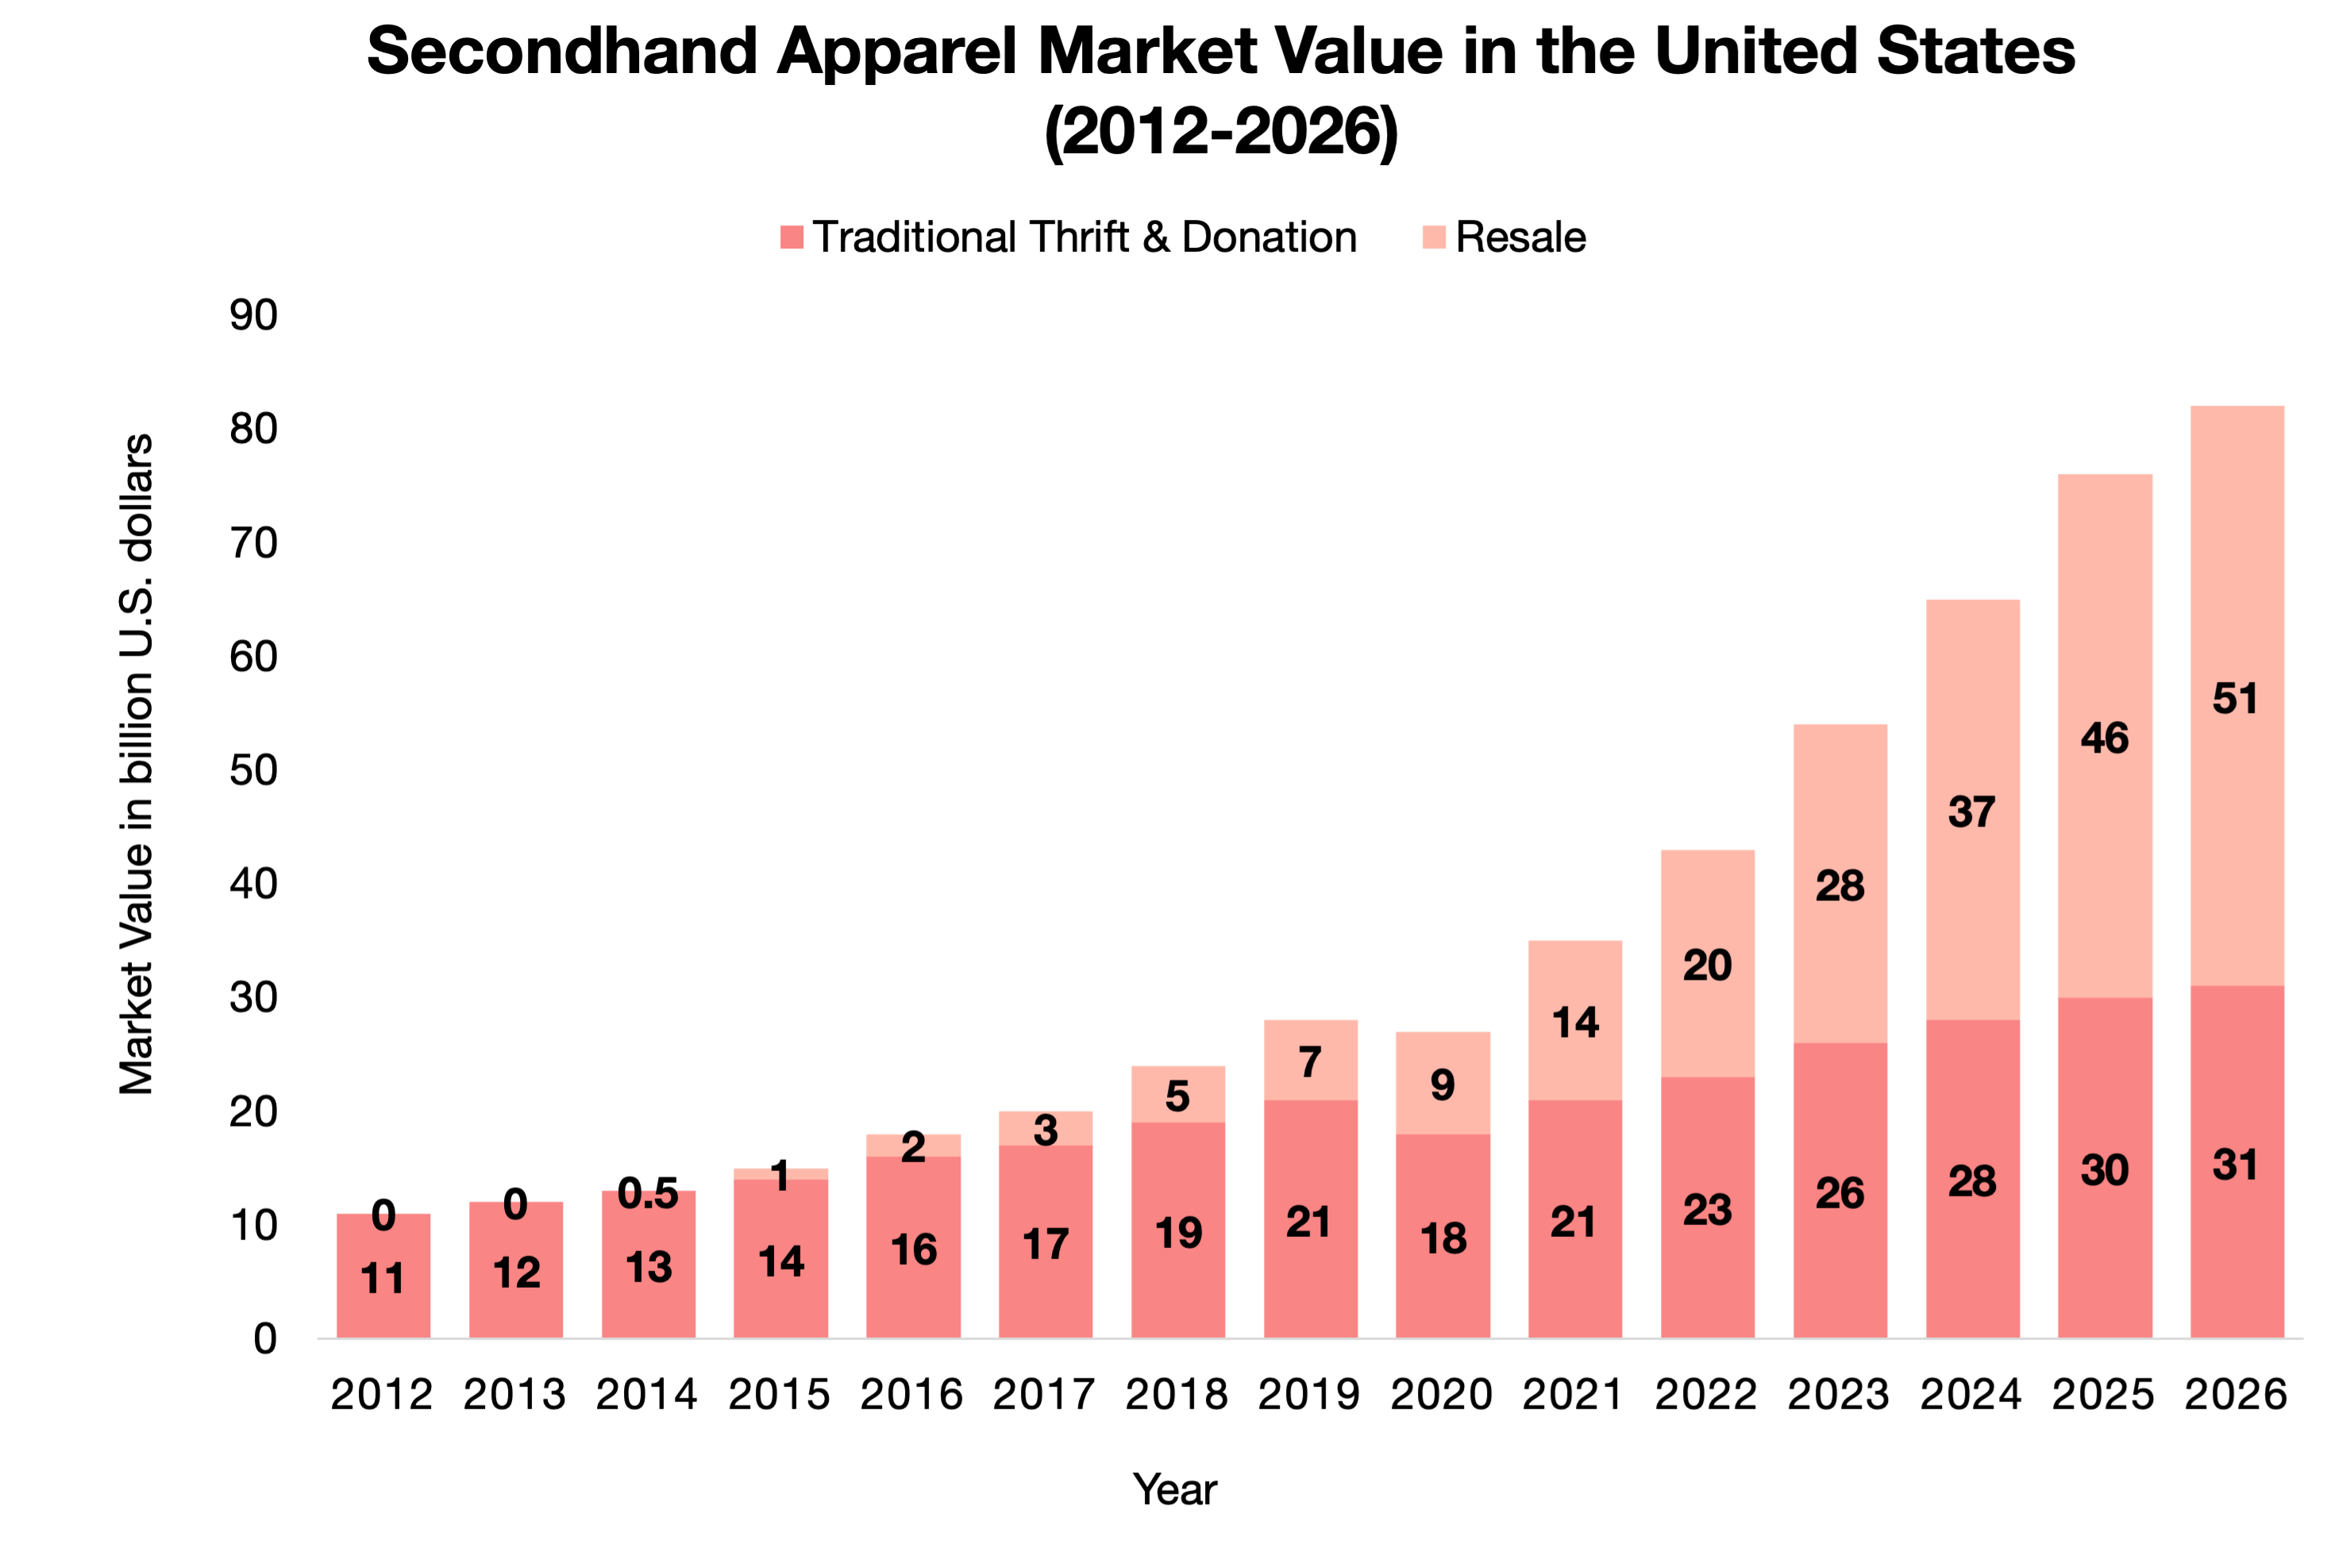 The rise of luxury fashion's resale market